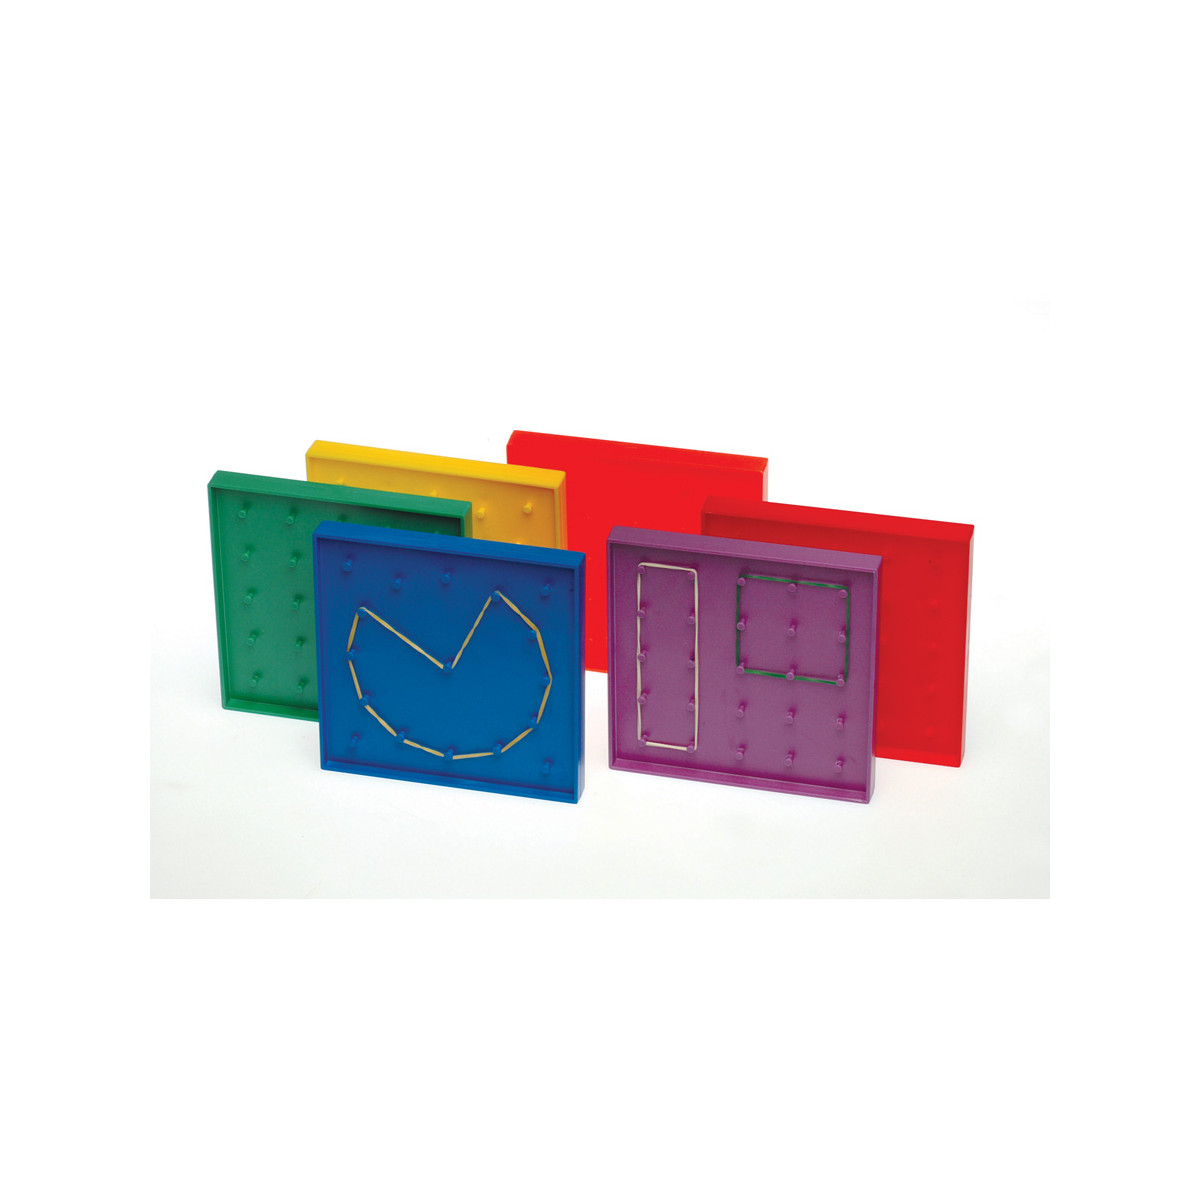 Geoboard 9 11x11 Pin Double-sided w/ Rubber Bands